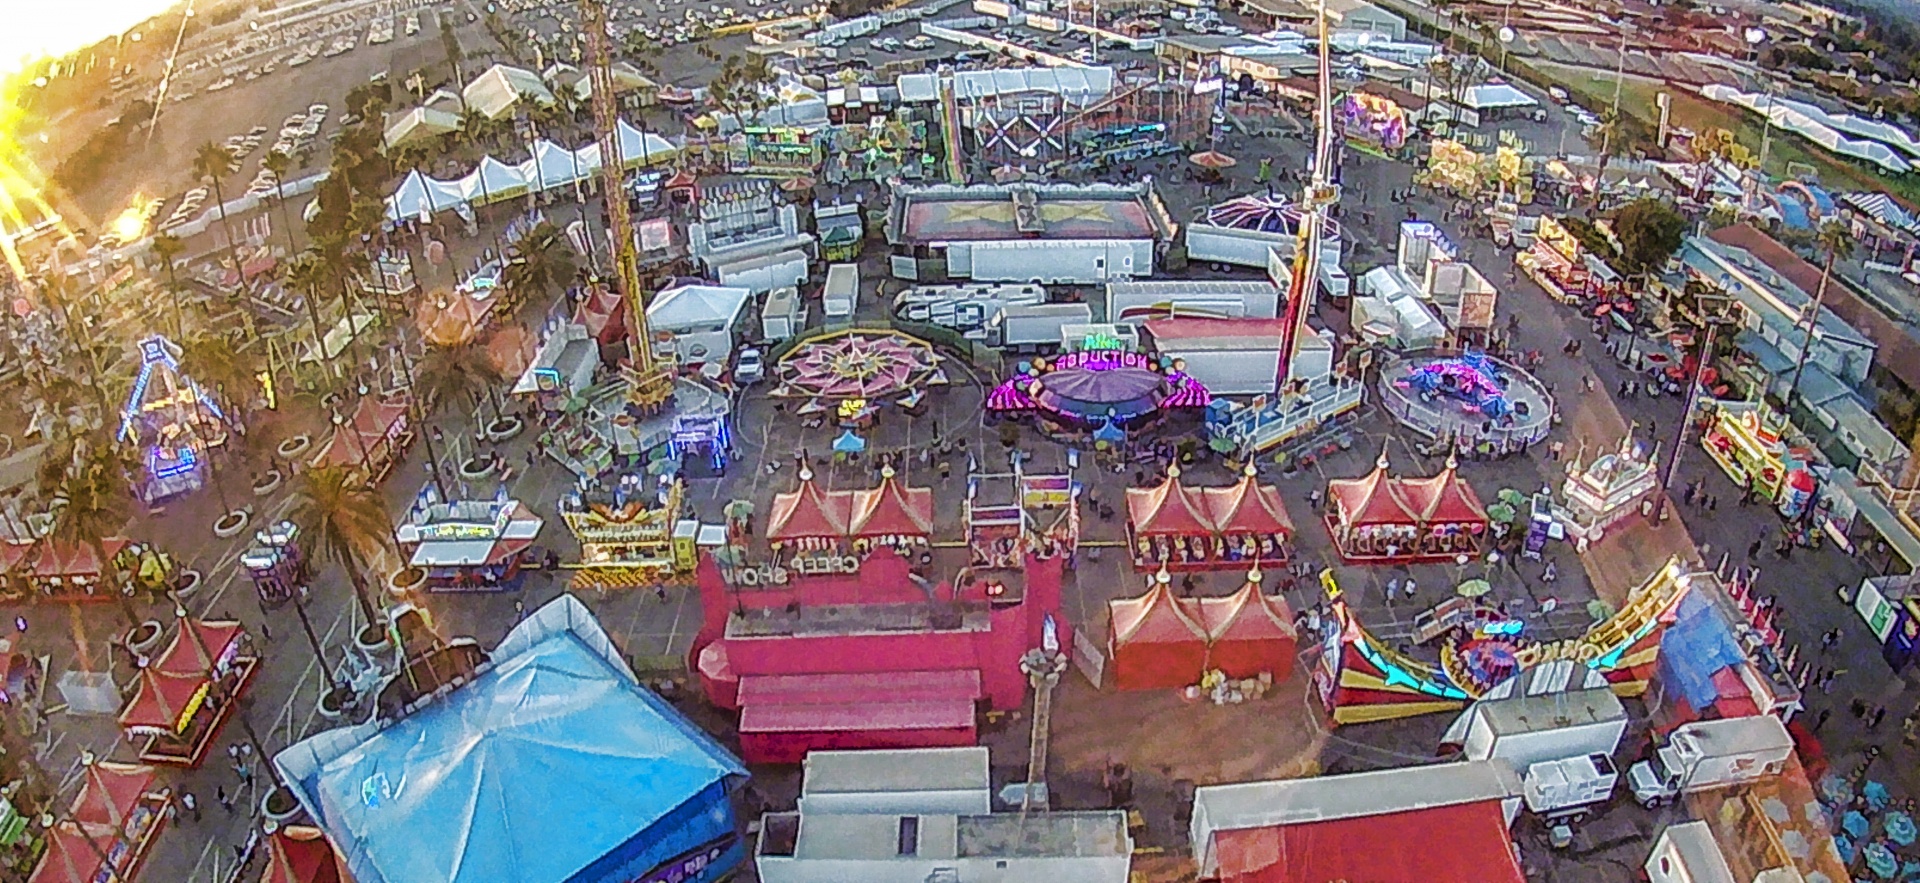 birds eye view of booths at the Los Angeles County Fair